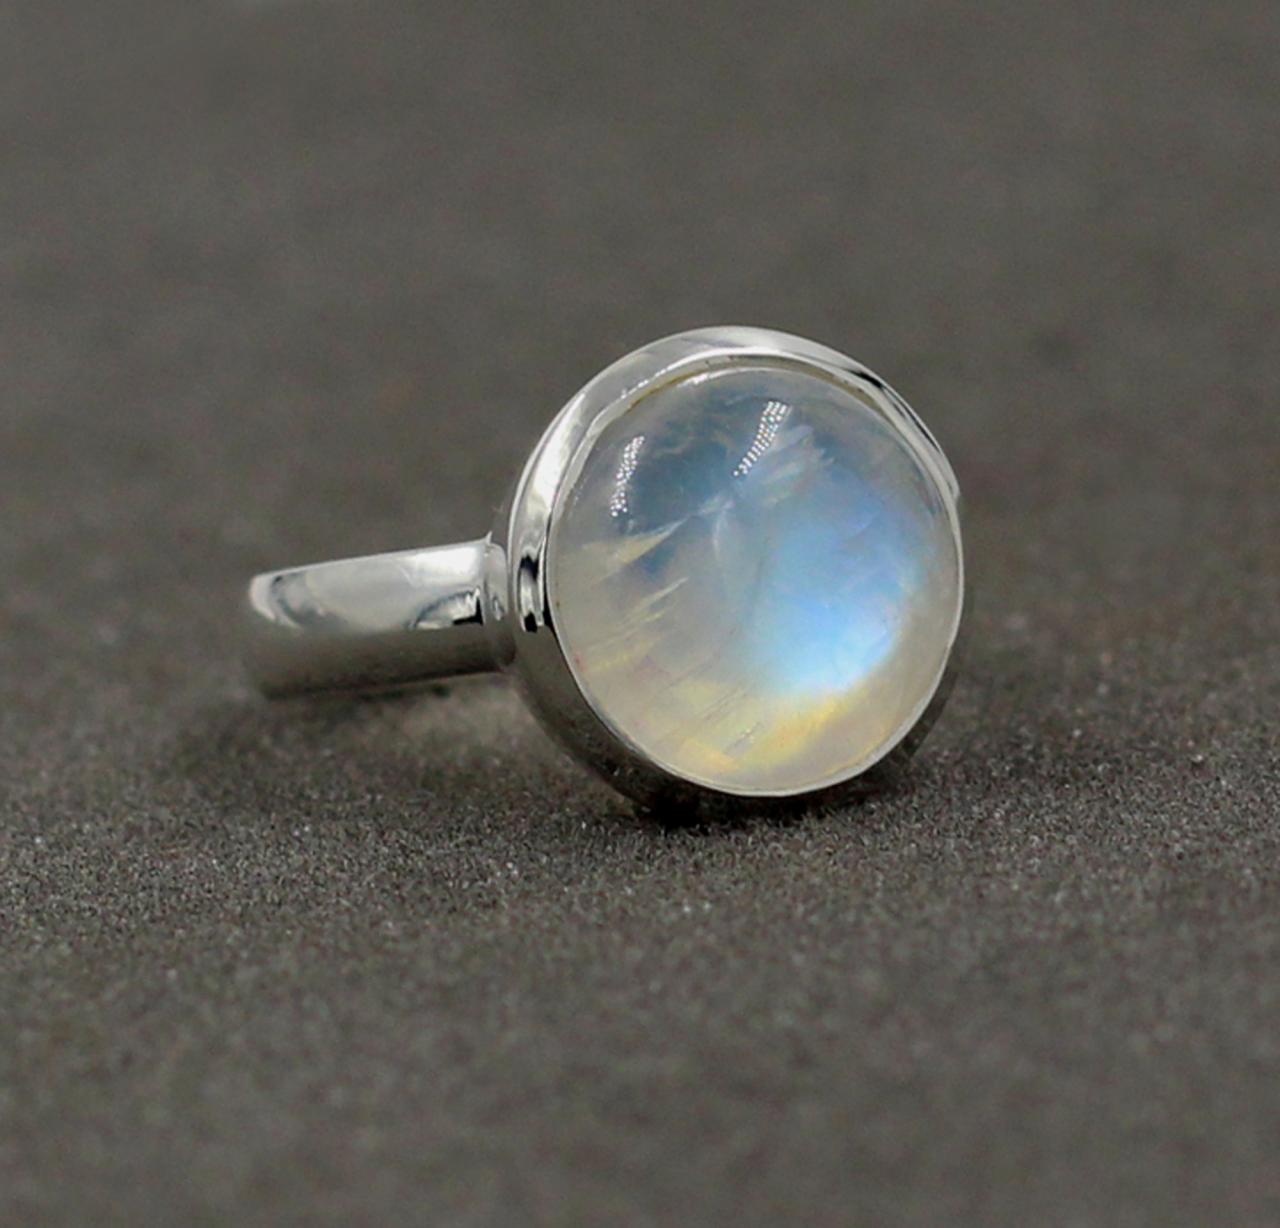 Rainbow Moonstone Handmade Ring Solid 925 Sterling Silver Jewelry,anniversary Ring,handmade 12 Mm Moonstone Ring,birthday Gift For Mother